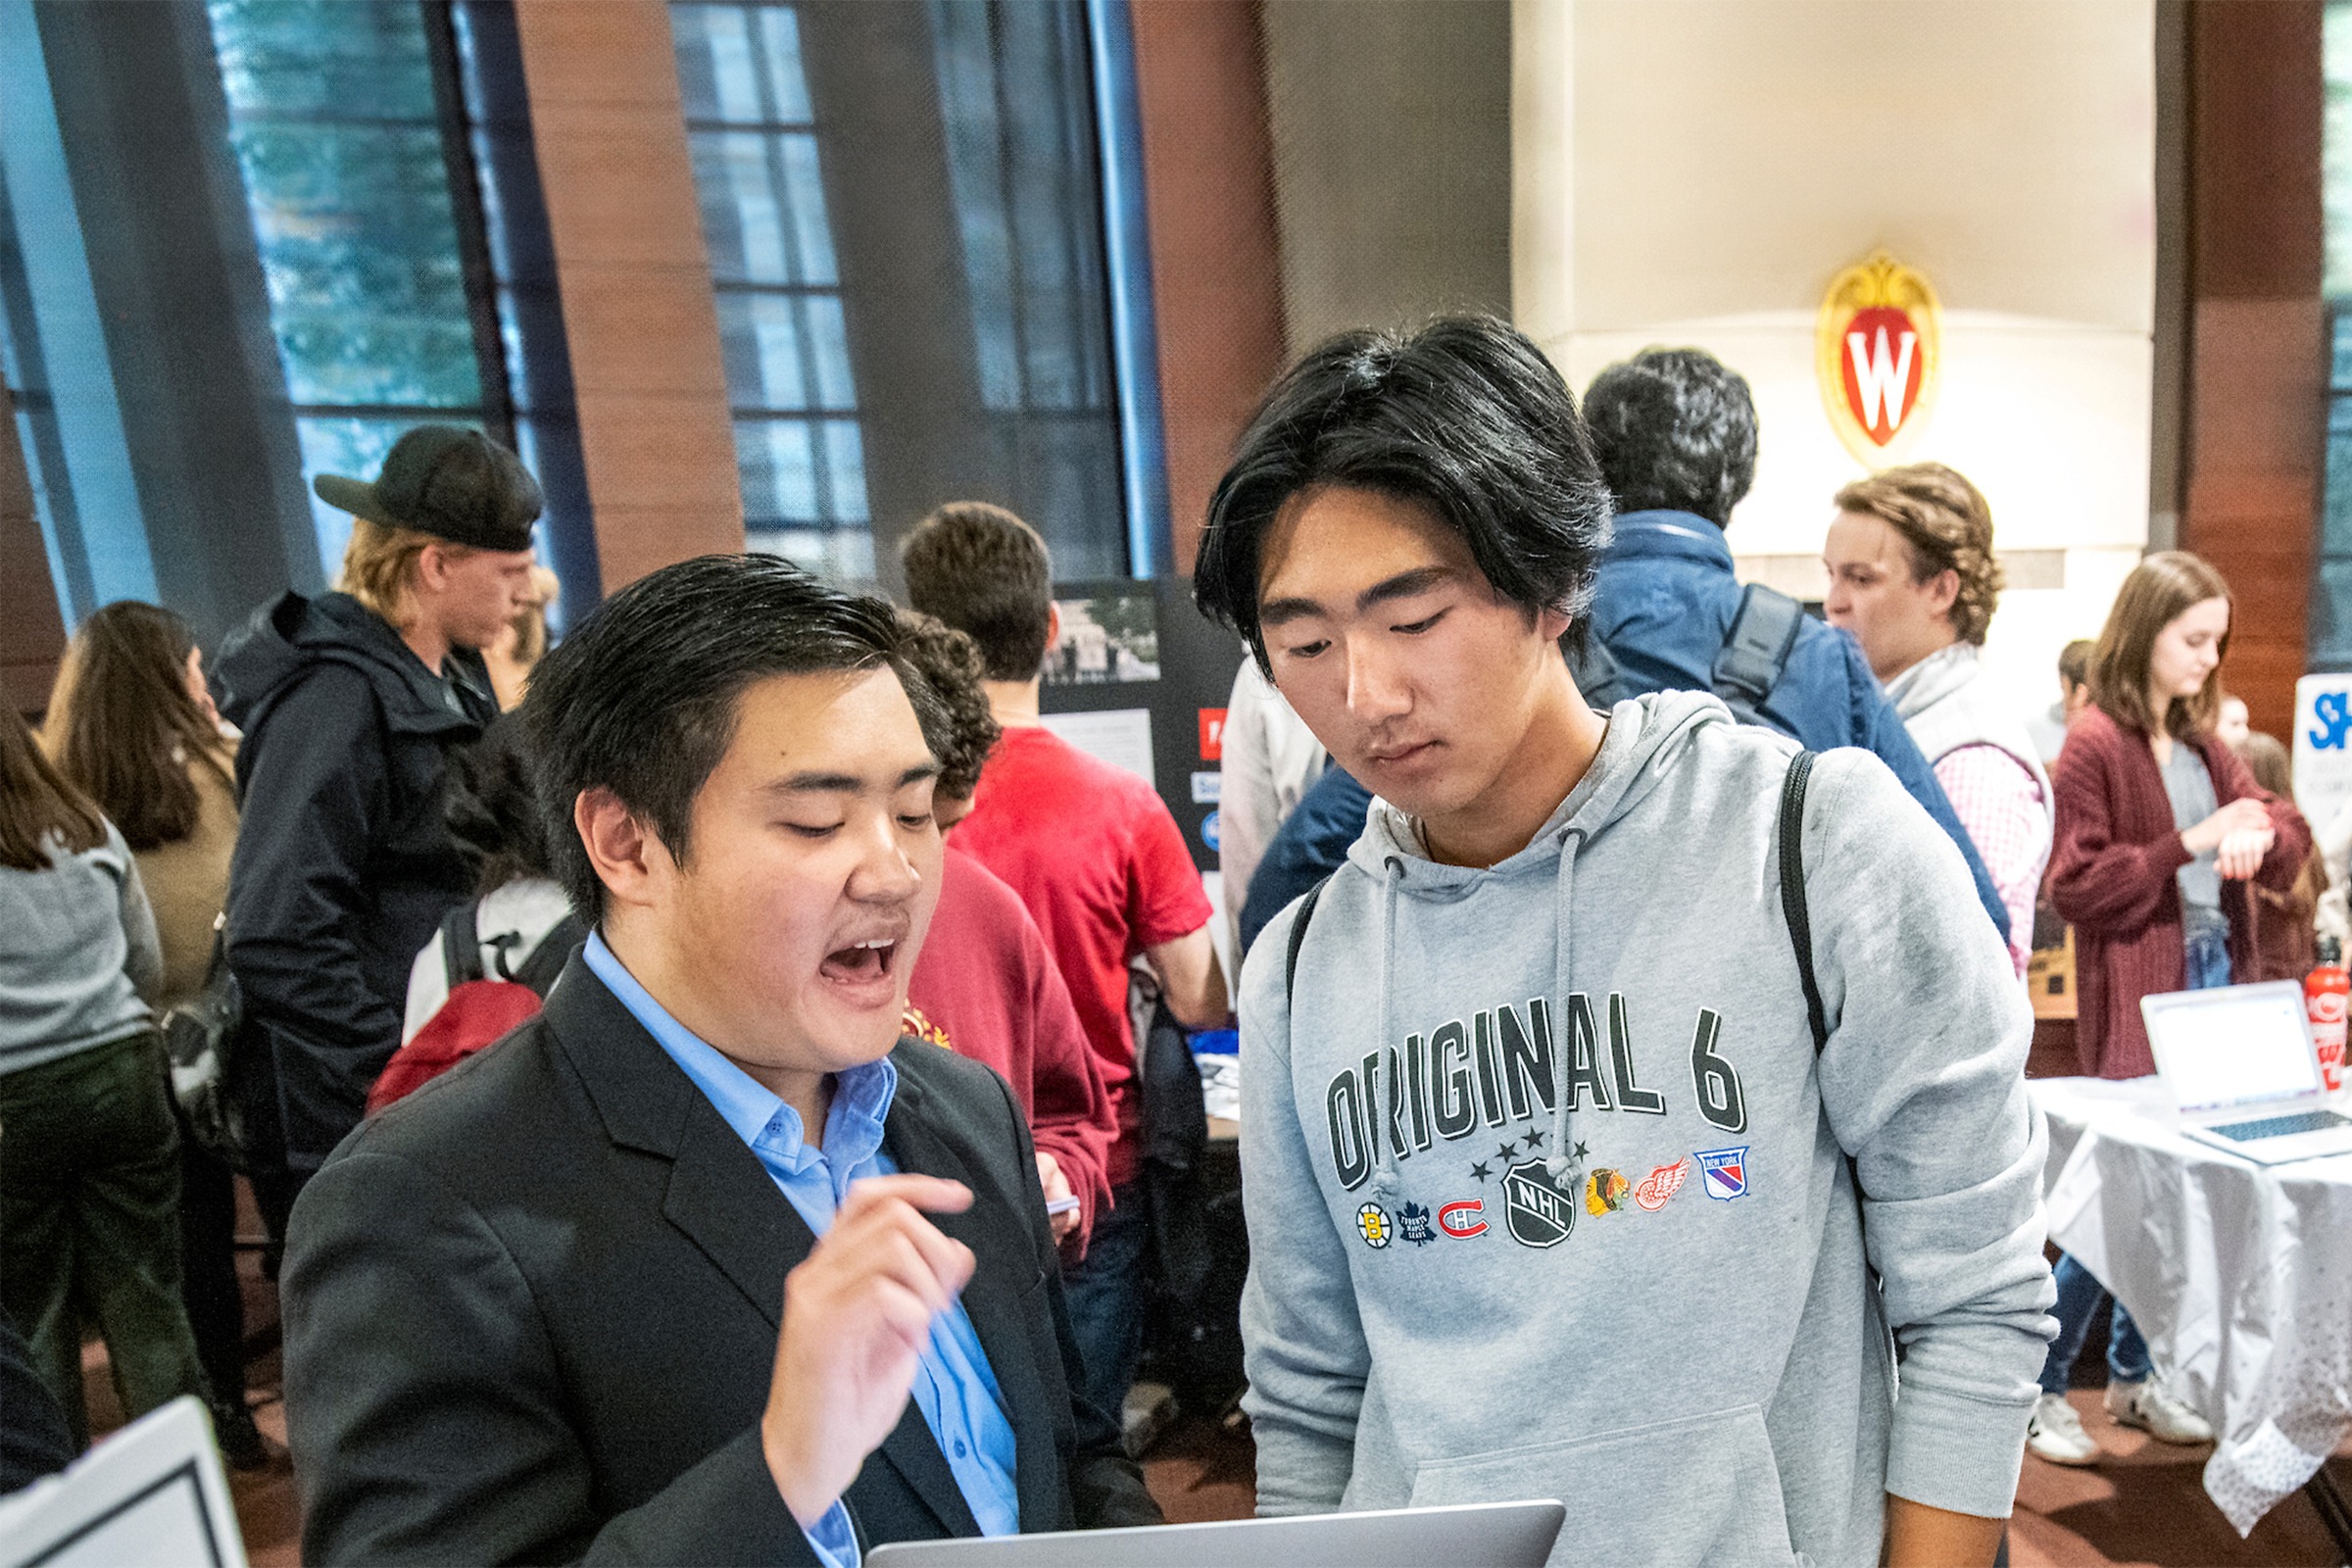 Two men in a discussion while looking at a laptop screen with students walking around behind them.